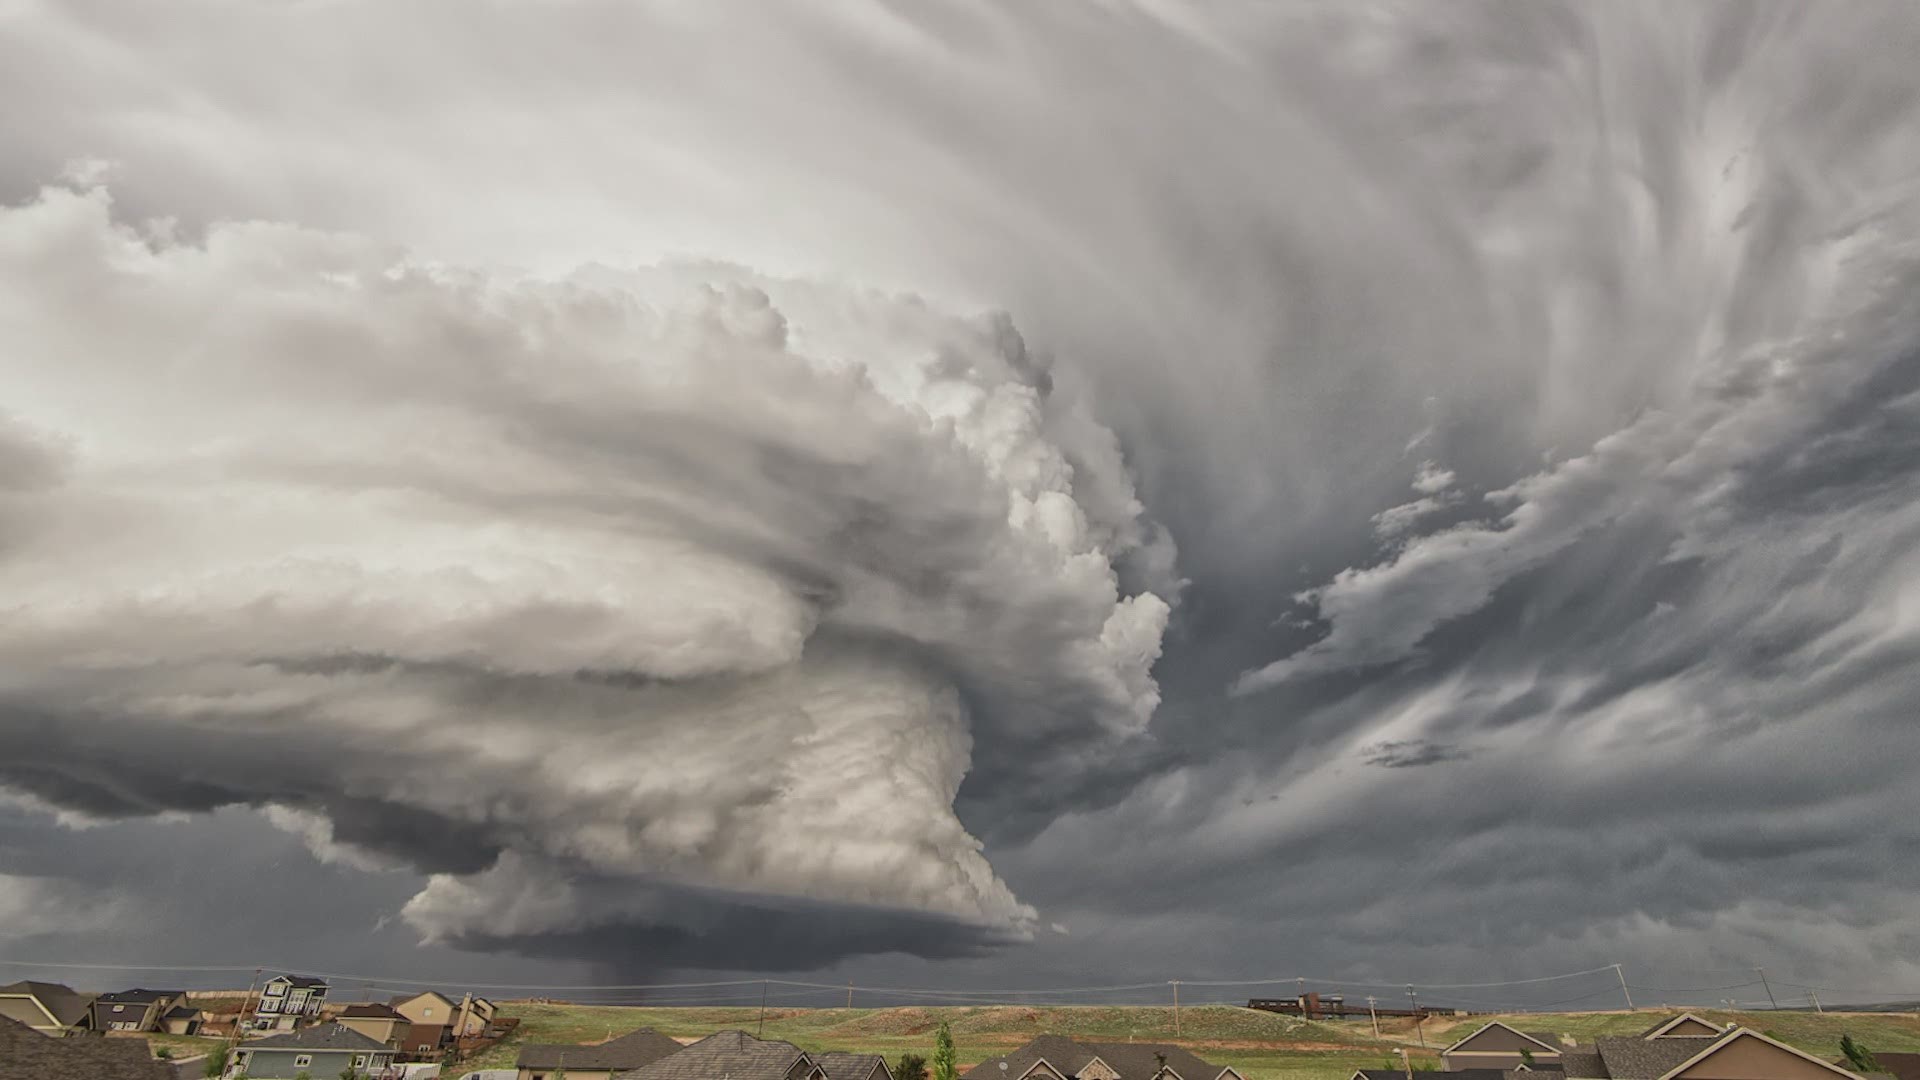 From a "hook echo" to wall clouds, here are some things to know about severe weather, how it forms and what to look for.